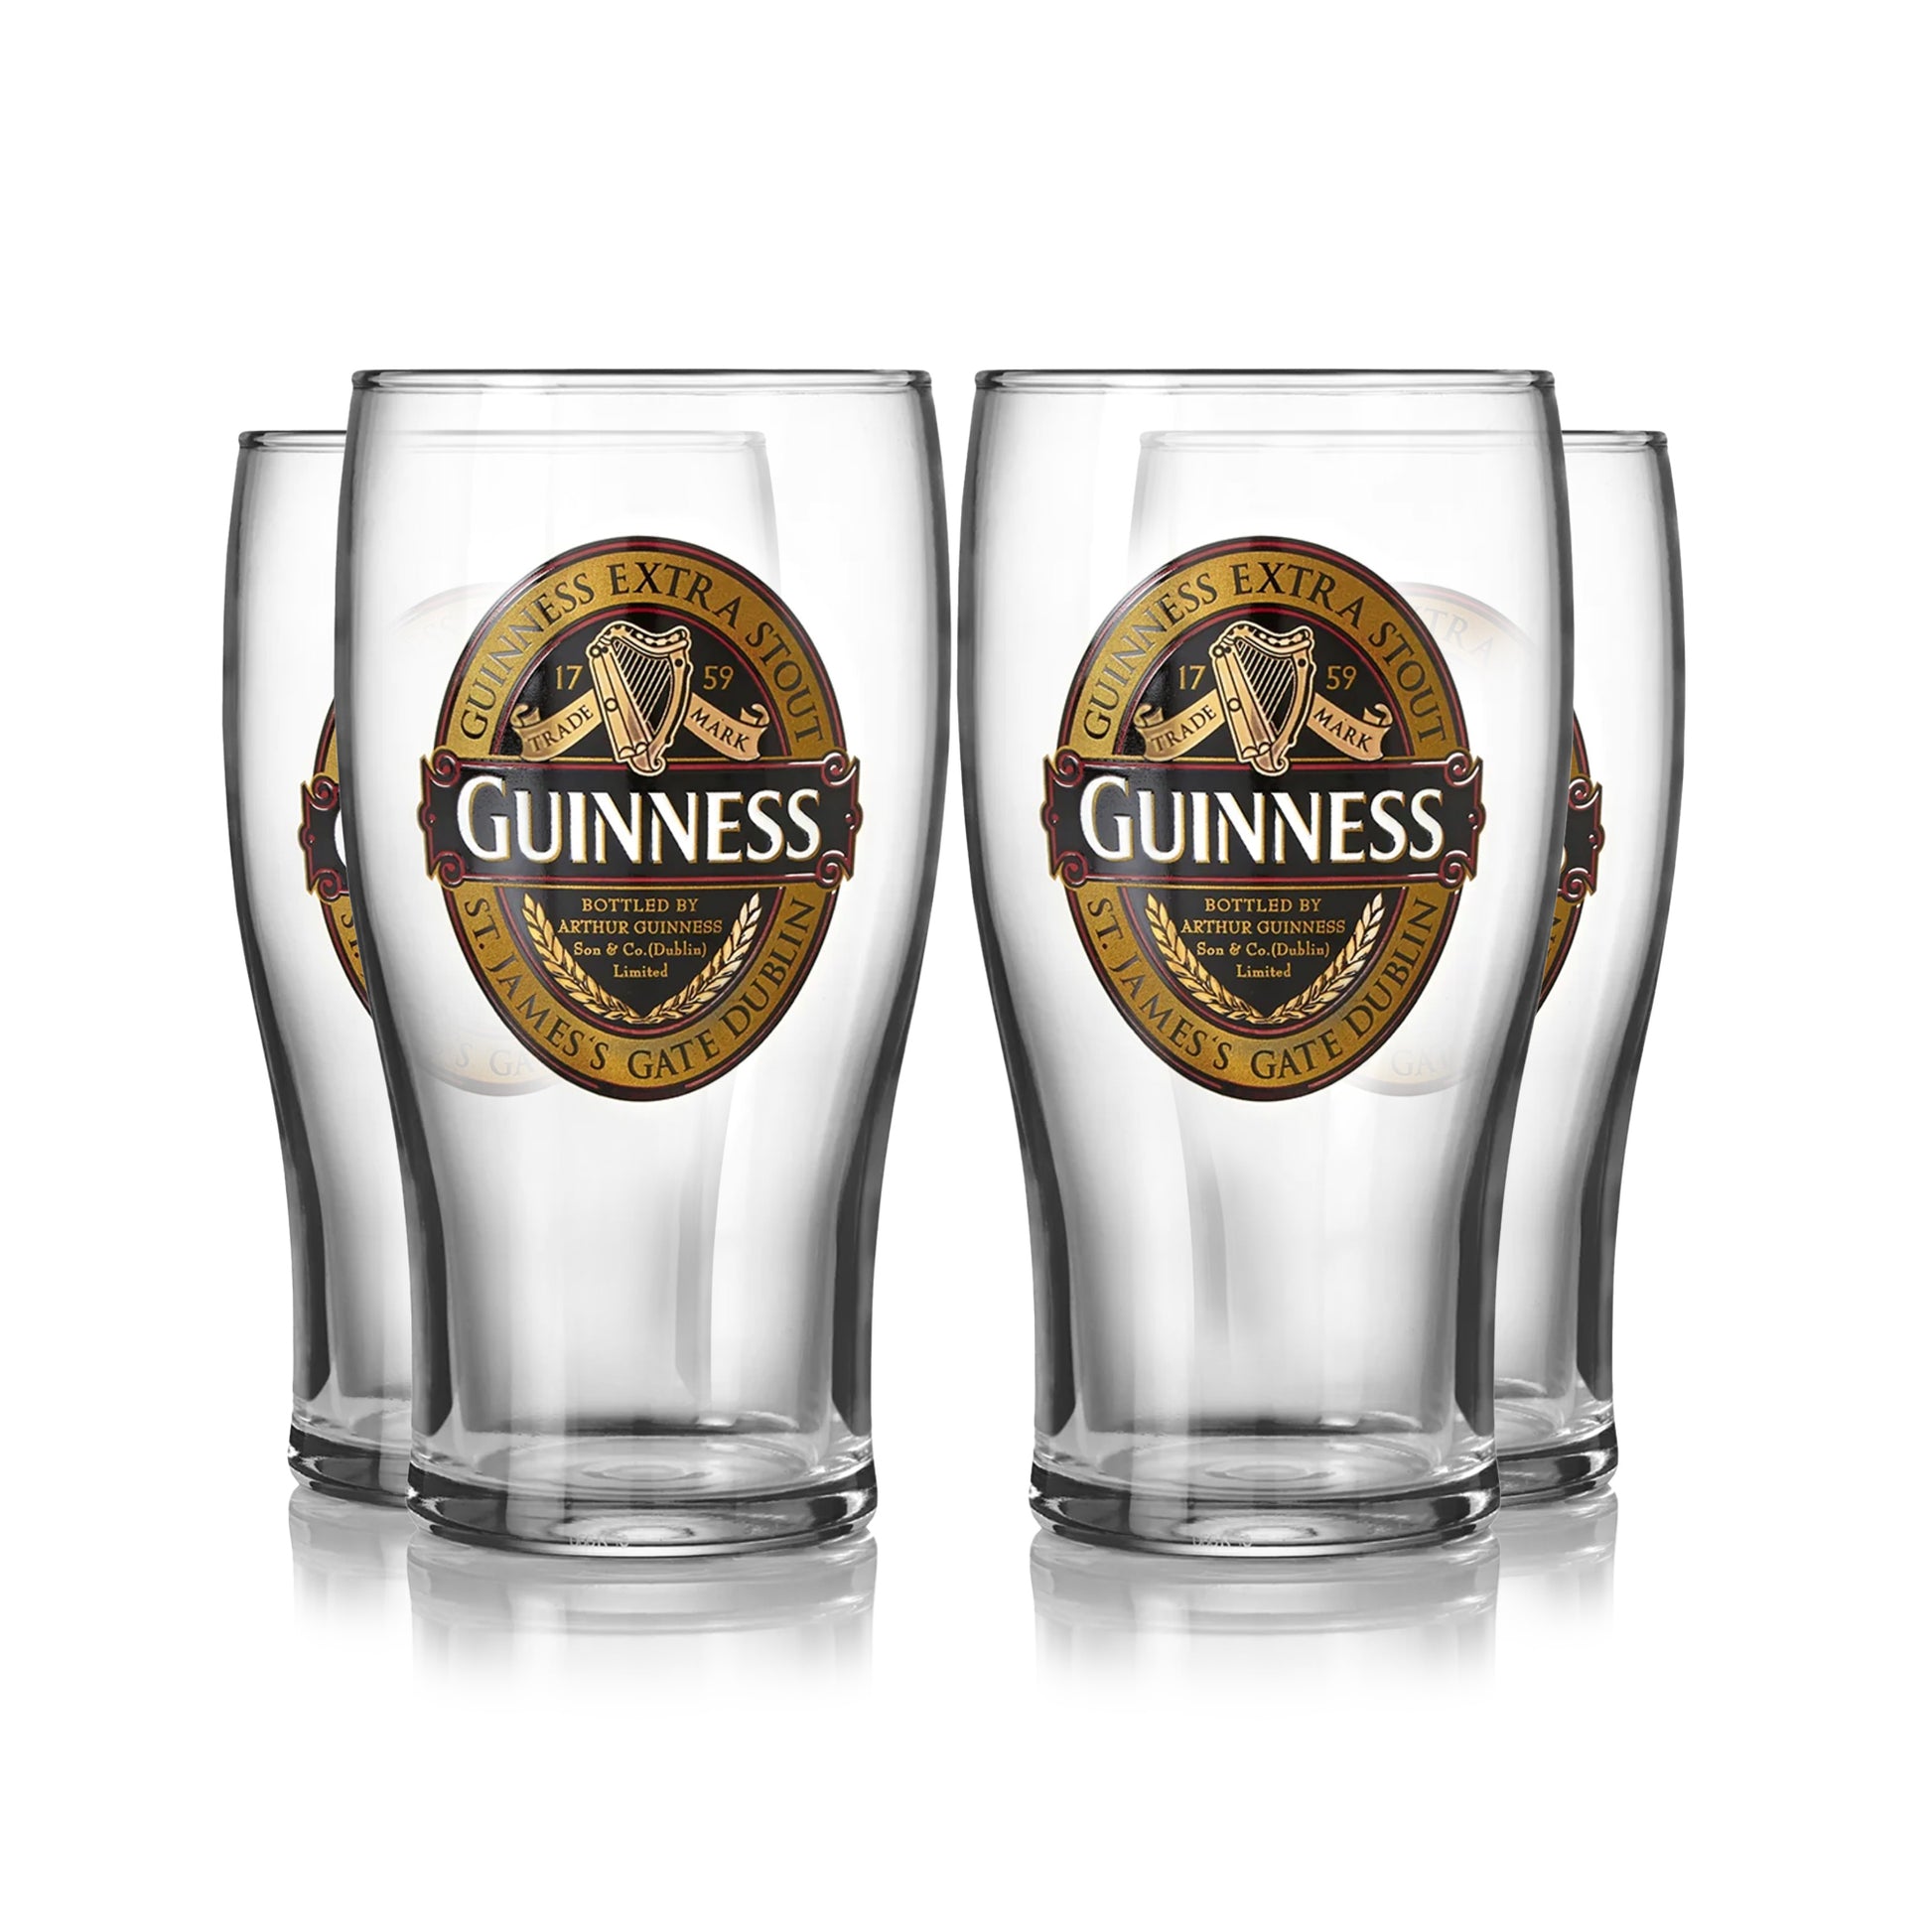 Four Guinness UK Classic Collection Pint Glasses - 4 Pack featuring the limited edition Extra Stout label, set against a white background.